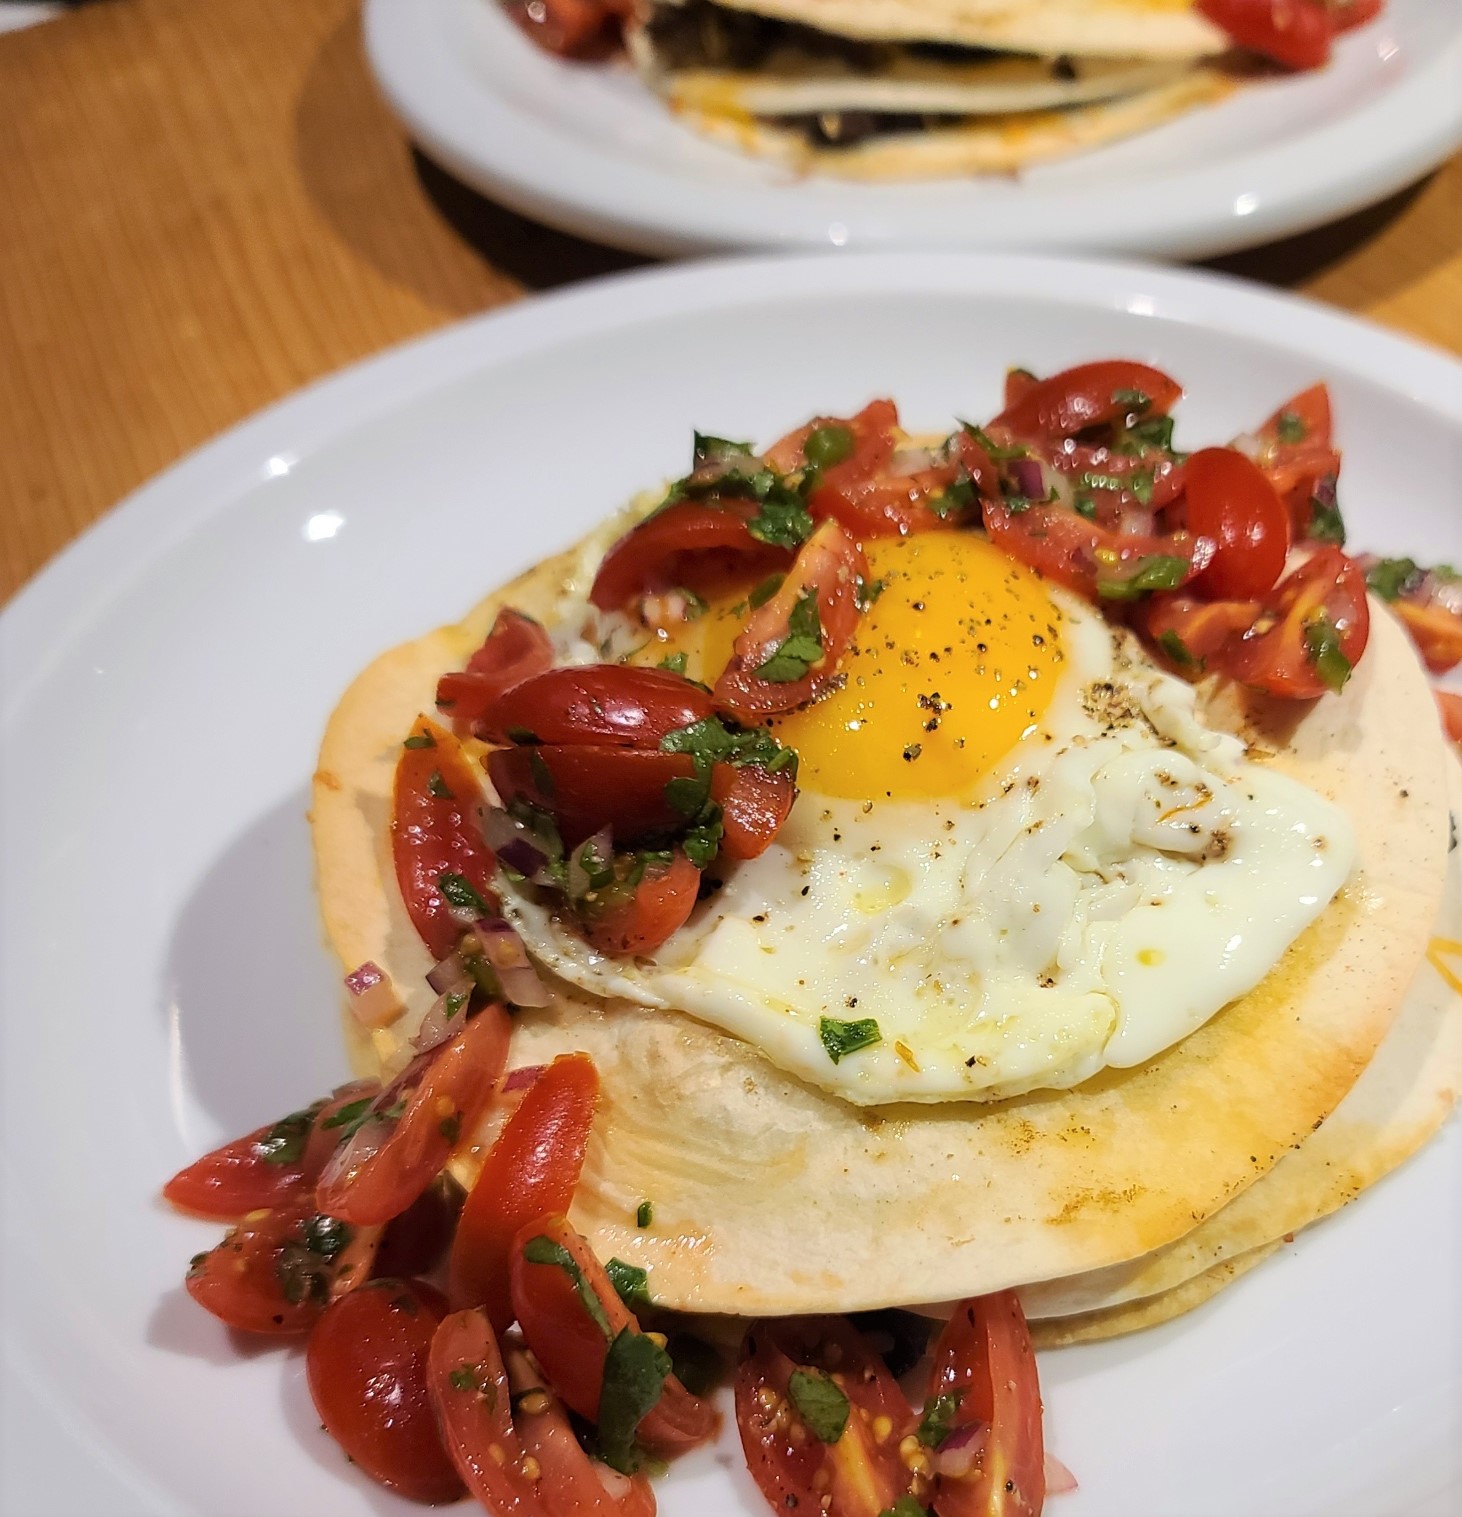 Sausage & black bean stack with eggs and salsa